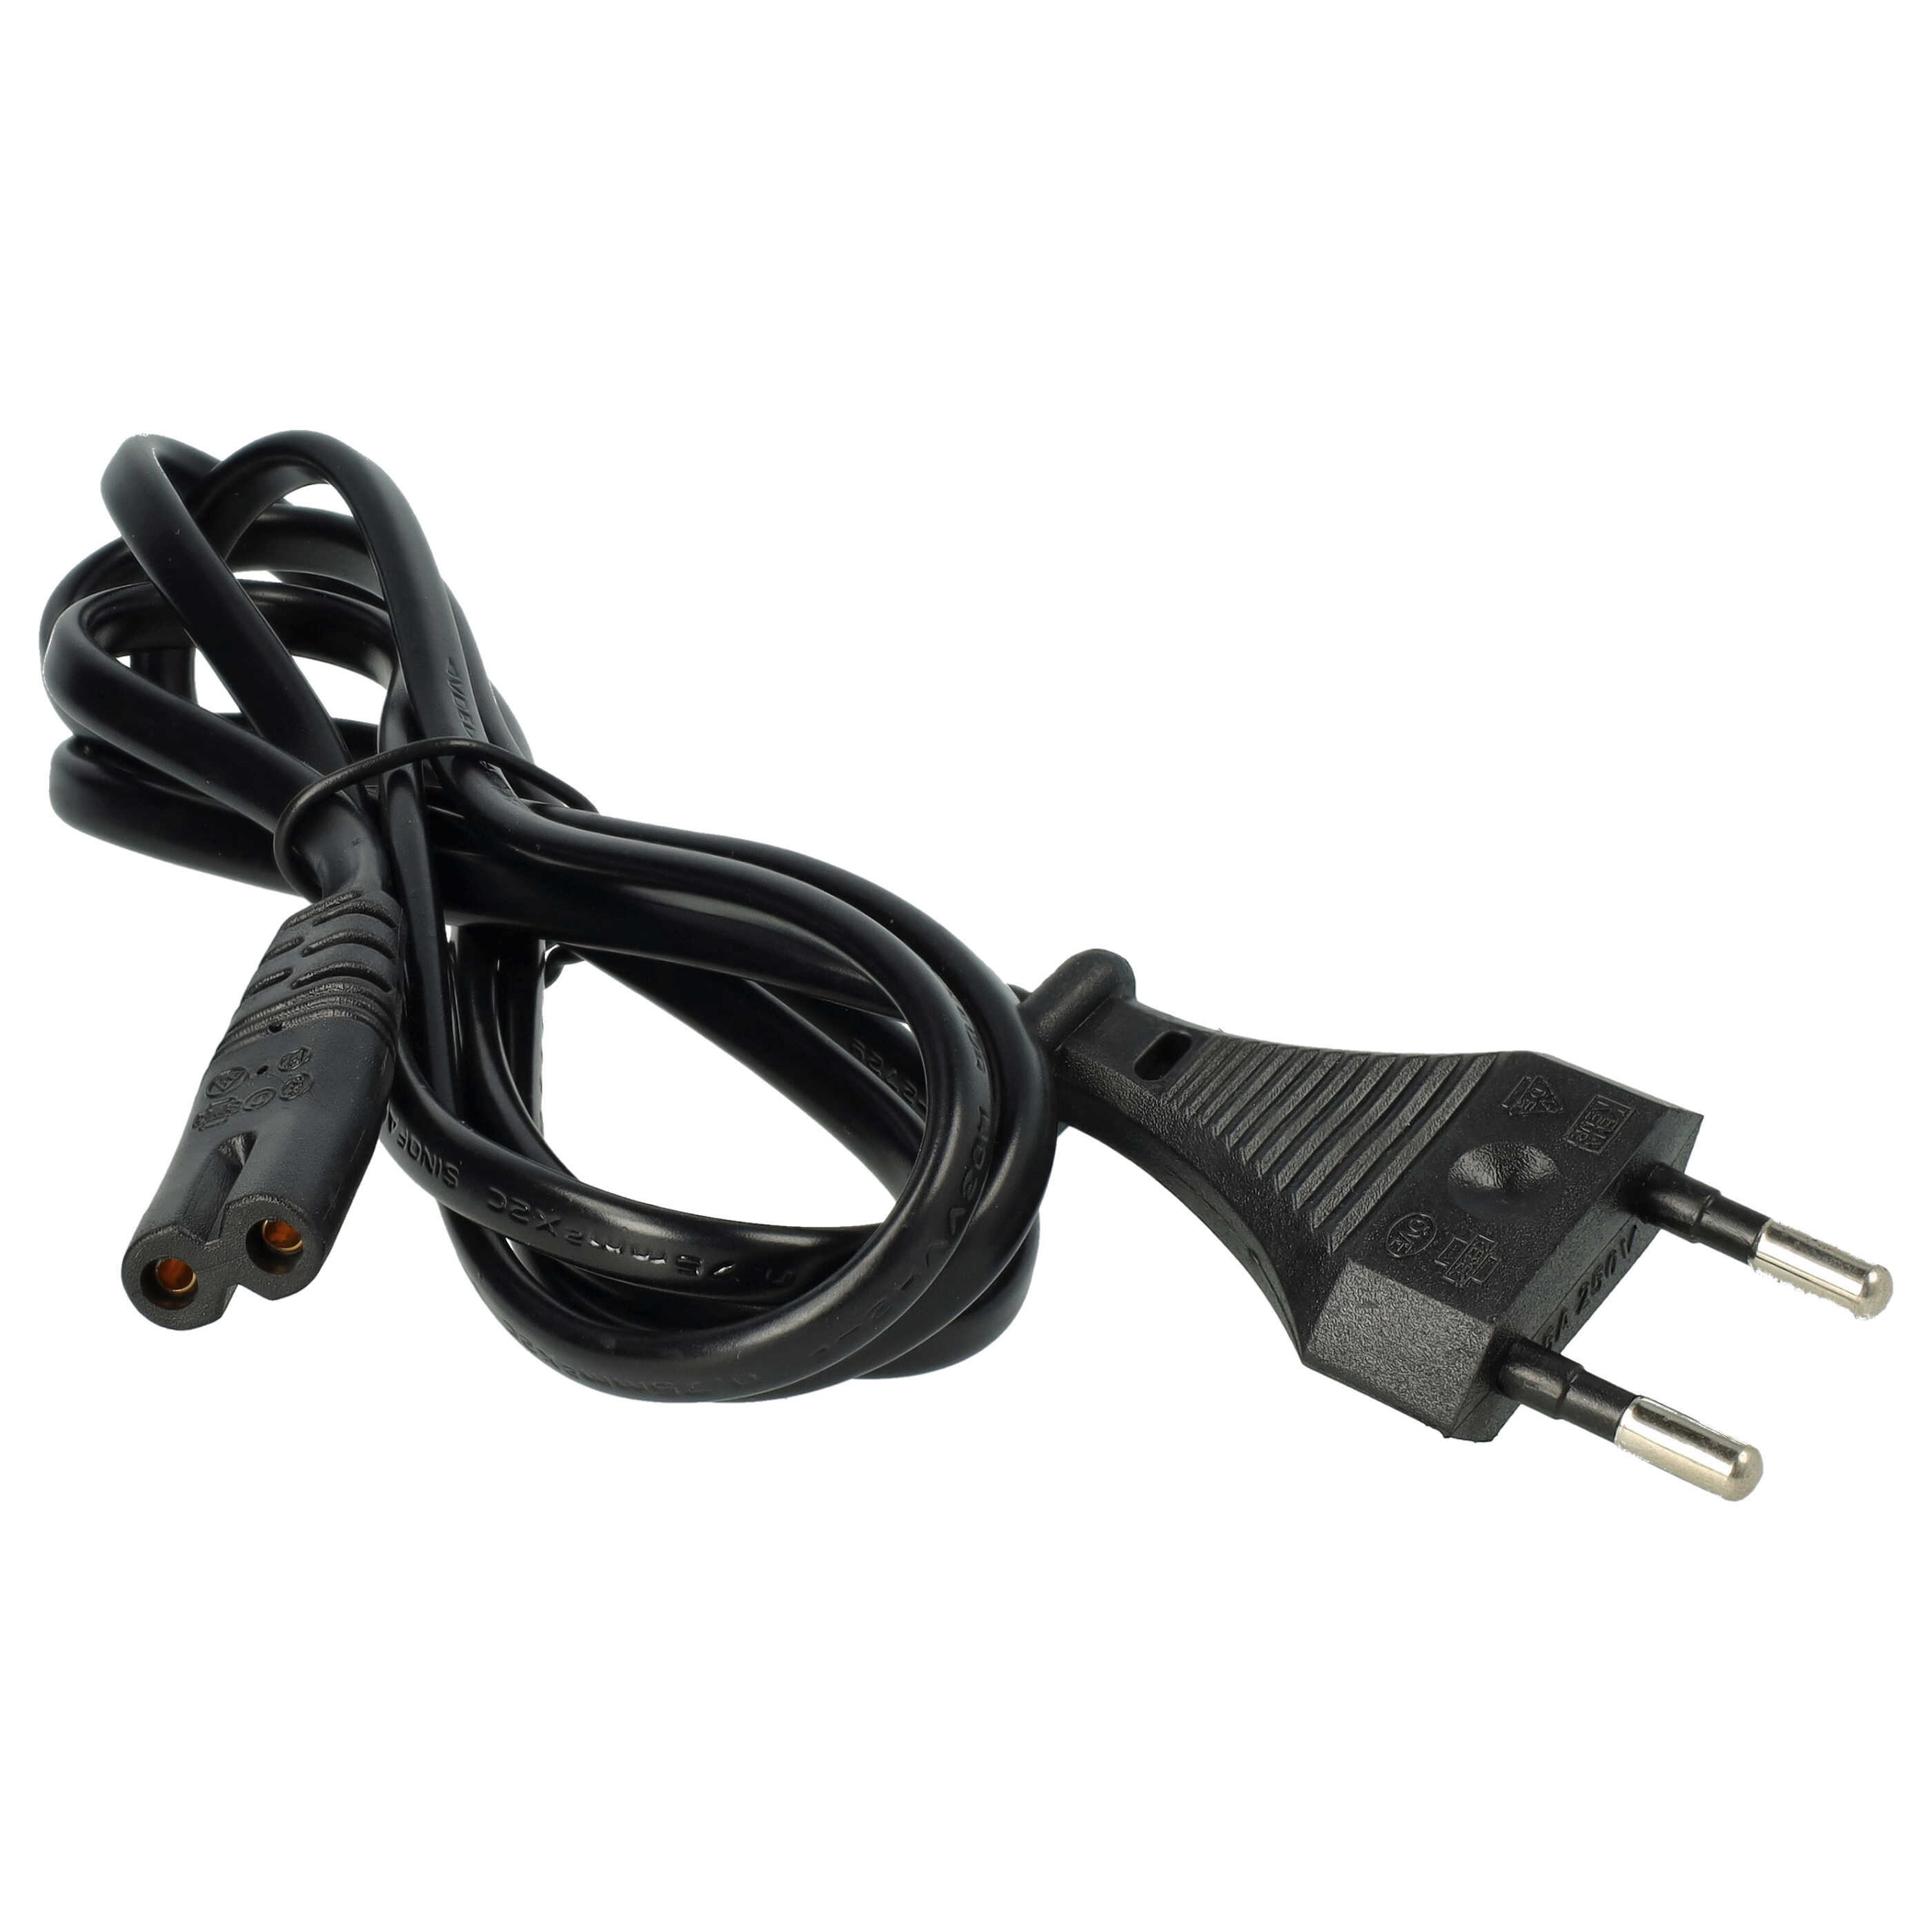 Charger suitable for Prophete Li-Ion E-Bike Battery etc. - For 36 V Batteries, With XLR Connector, 2.0 A